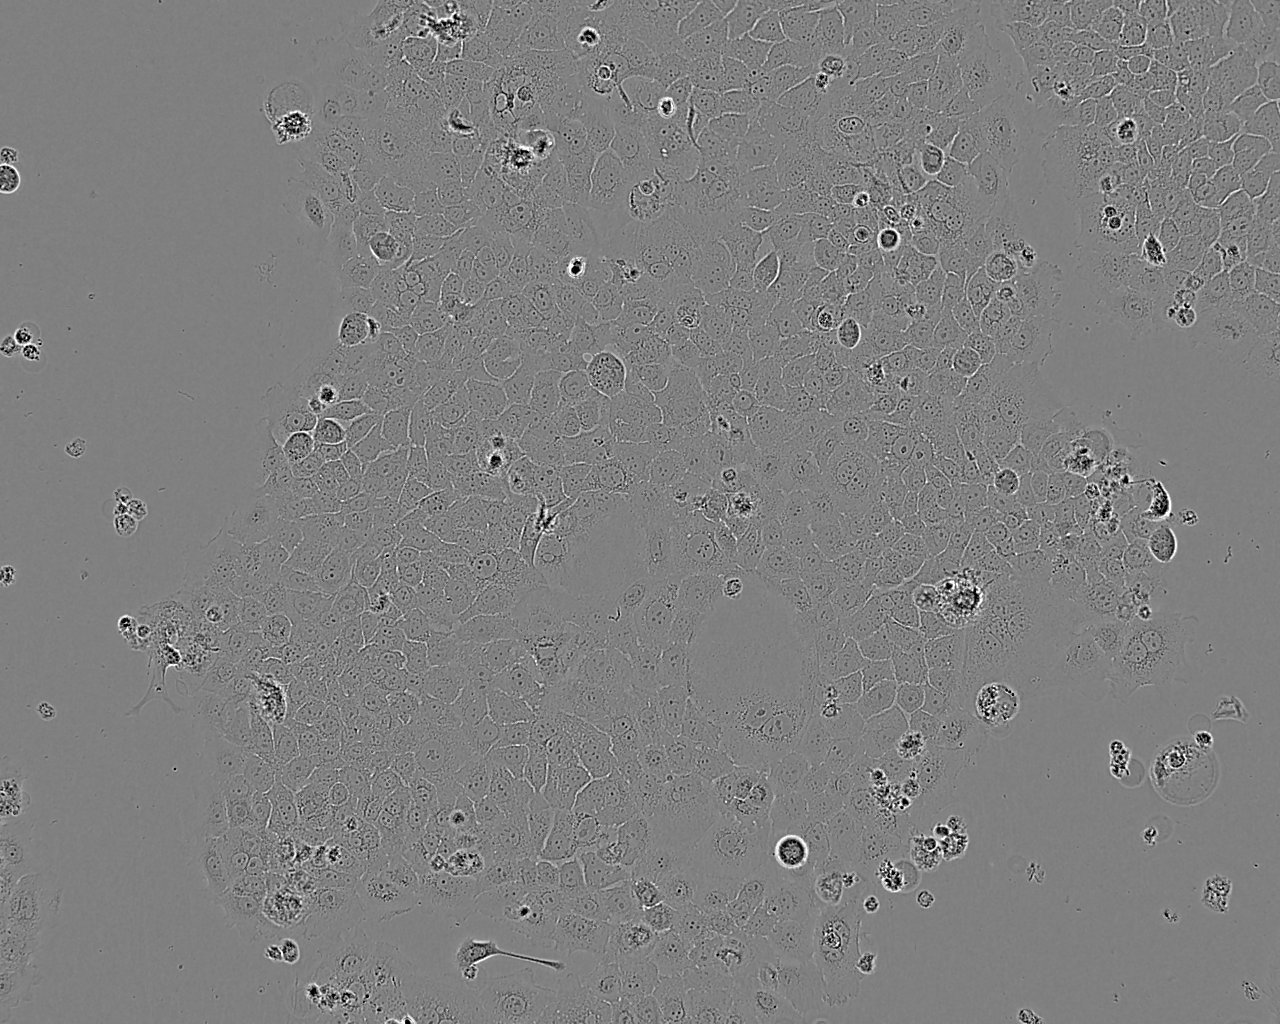 NCTC 1469 Cell:小鼠正常肝细胞系,NCTC 1469 Cell